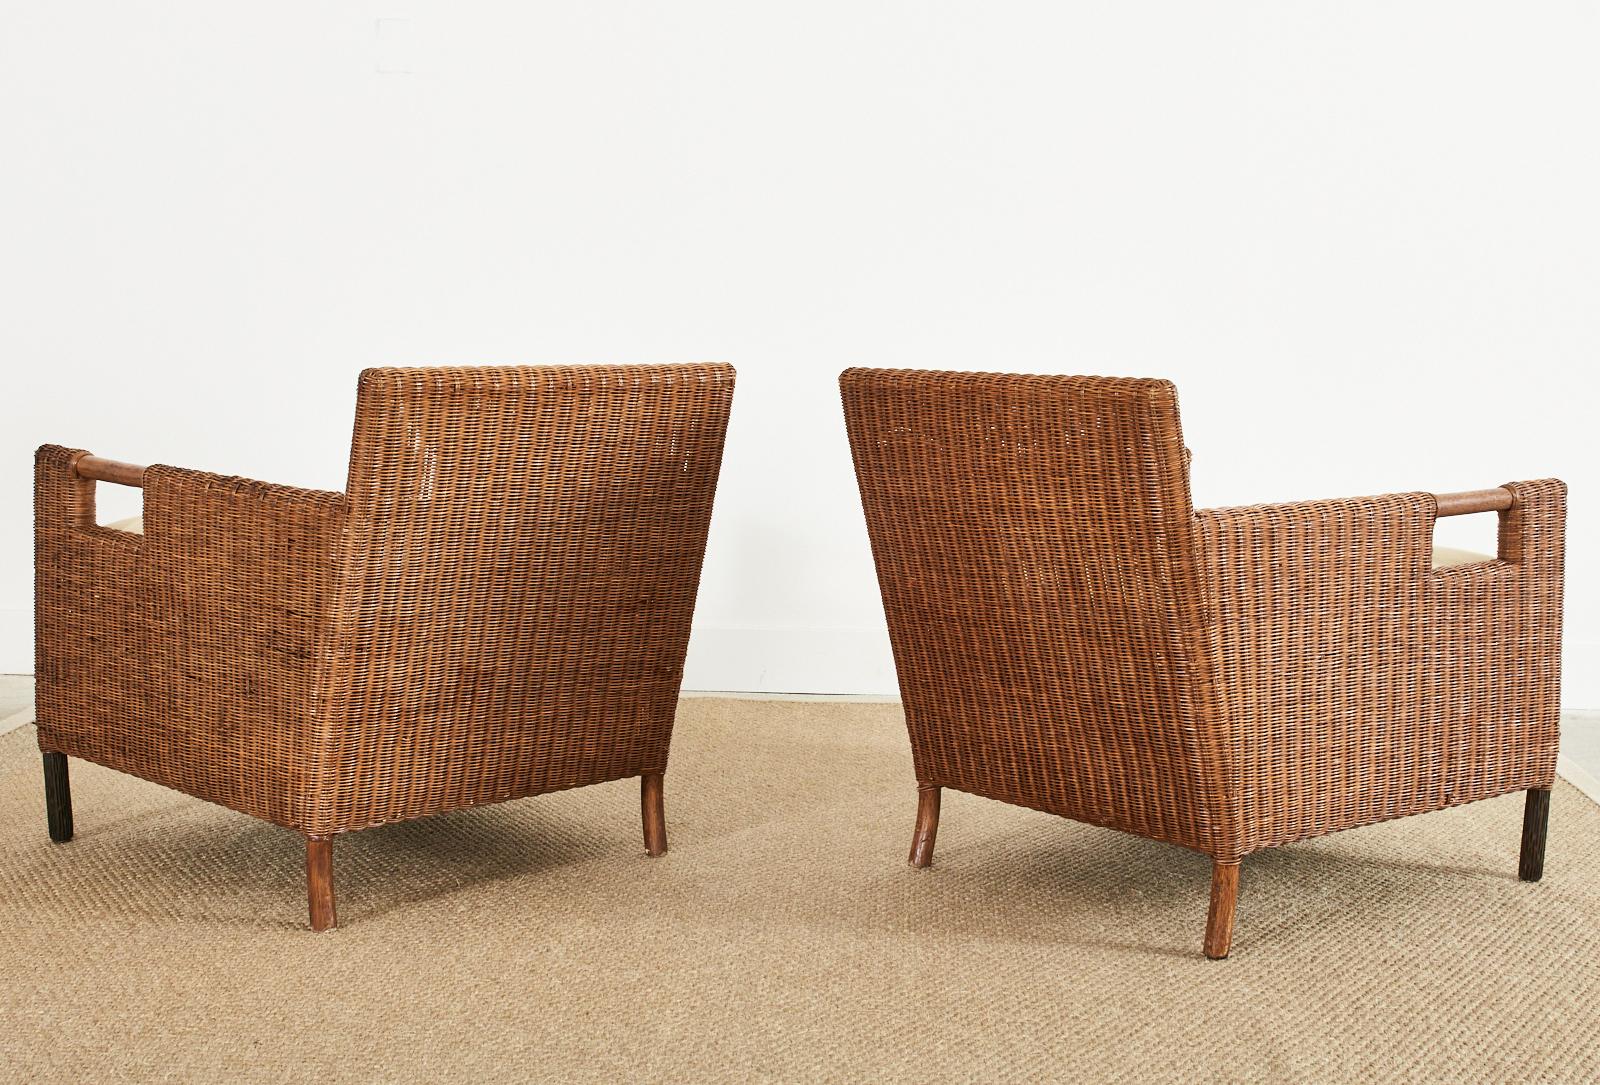 Pair of McGuire Woven Rattan Wicker Lounge Armchairs 1